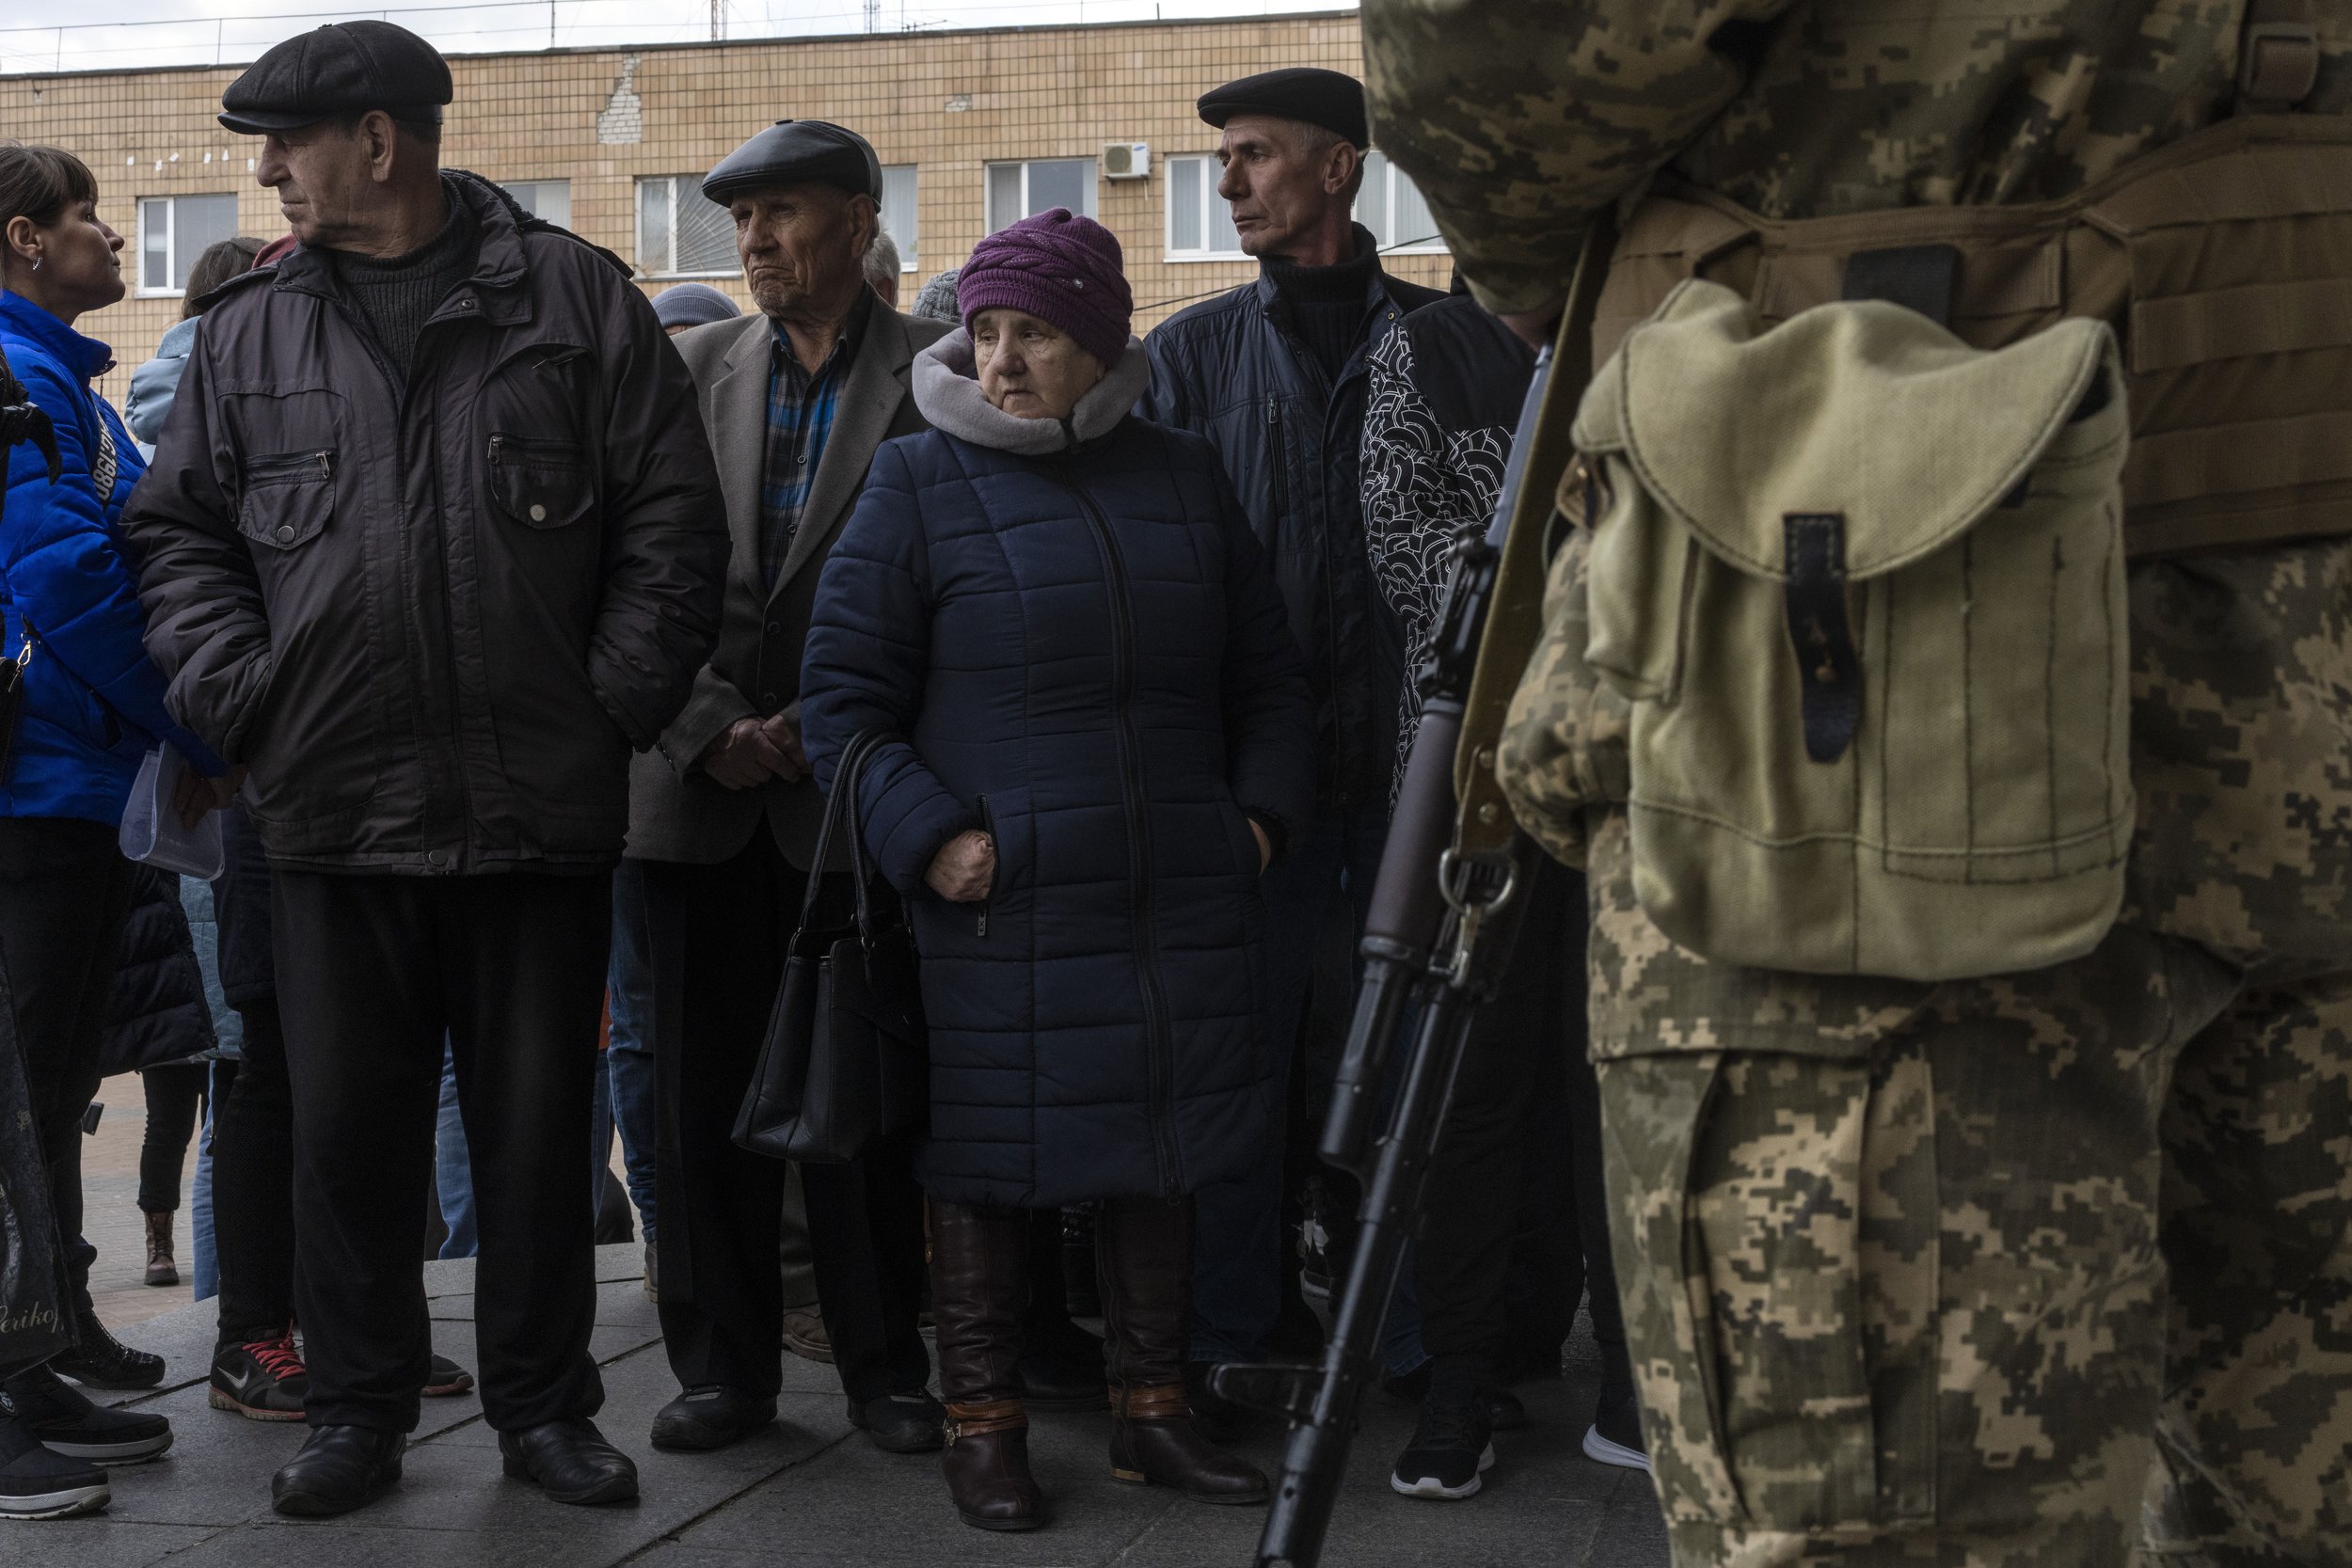  Displaced people wait in line outside the District Department of the State Migration Service to receive food and a place to sleep, in Brovary, on the outskirts of Kyiv, Ukraine, Tuesday, March 29, 2022. (AP Photo/Rodrigo Abd) 